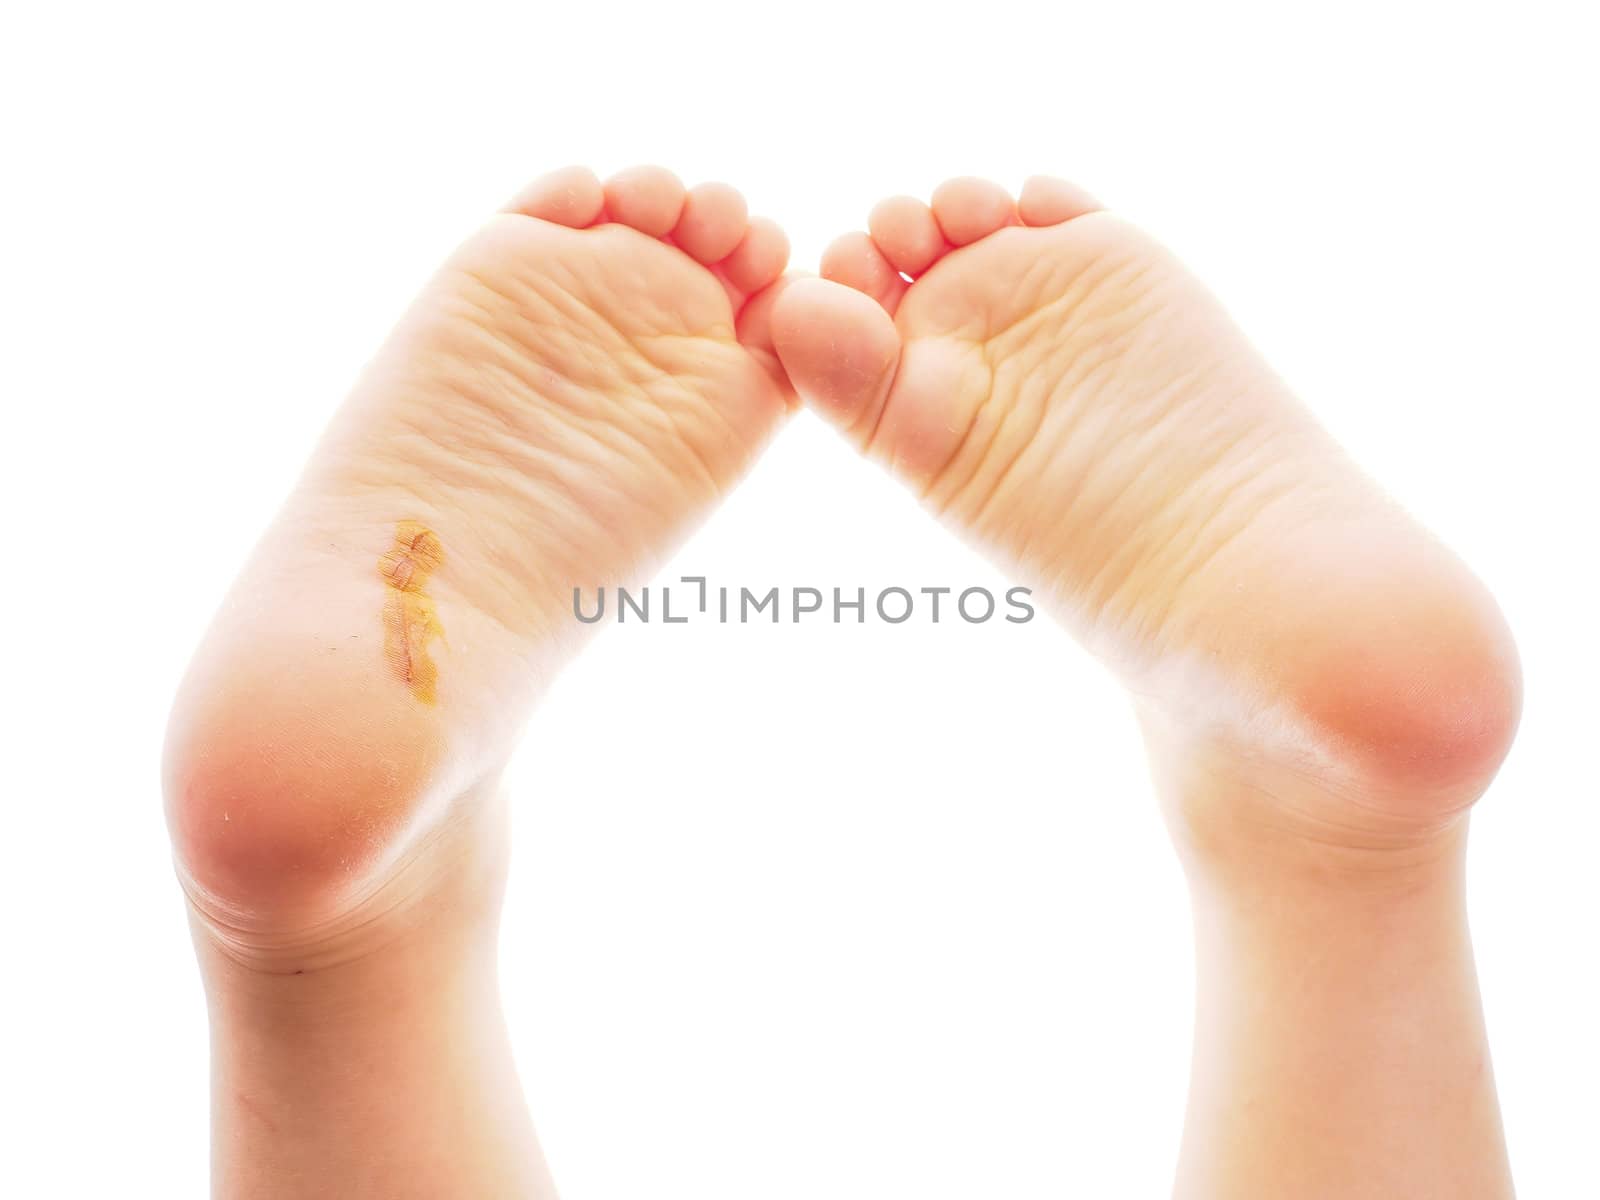 Child showing feet with a fresh wound underneath the right heel  by Arvebettum